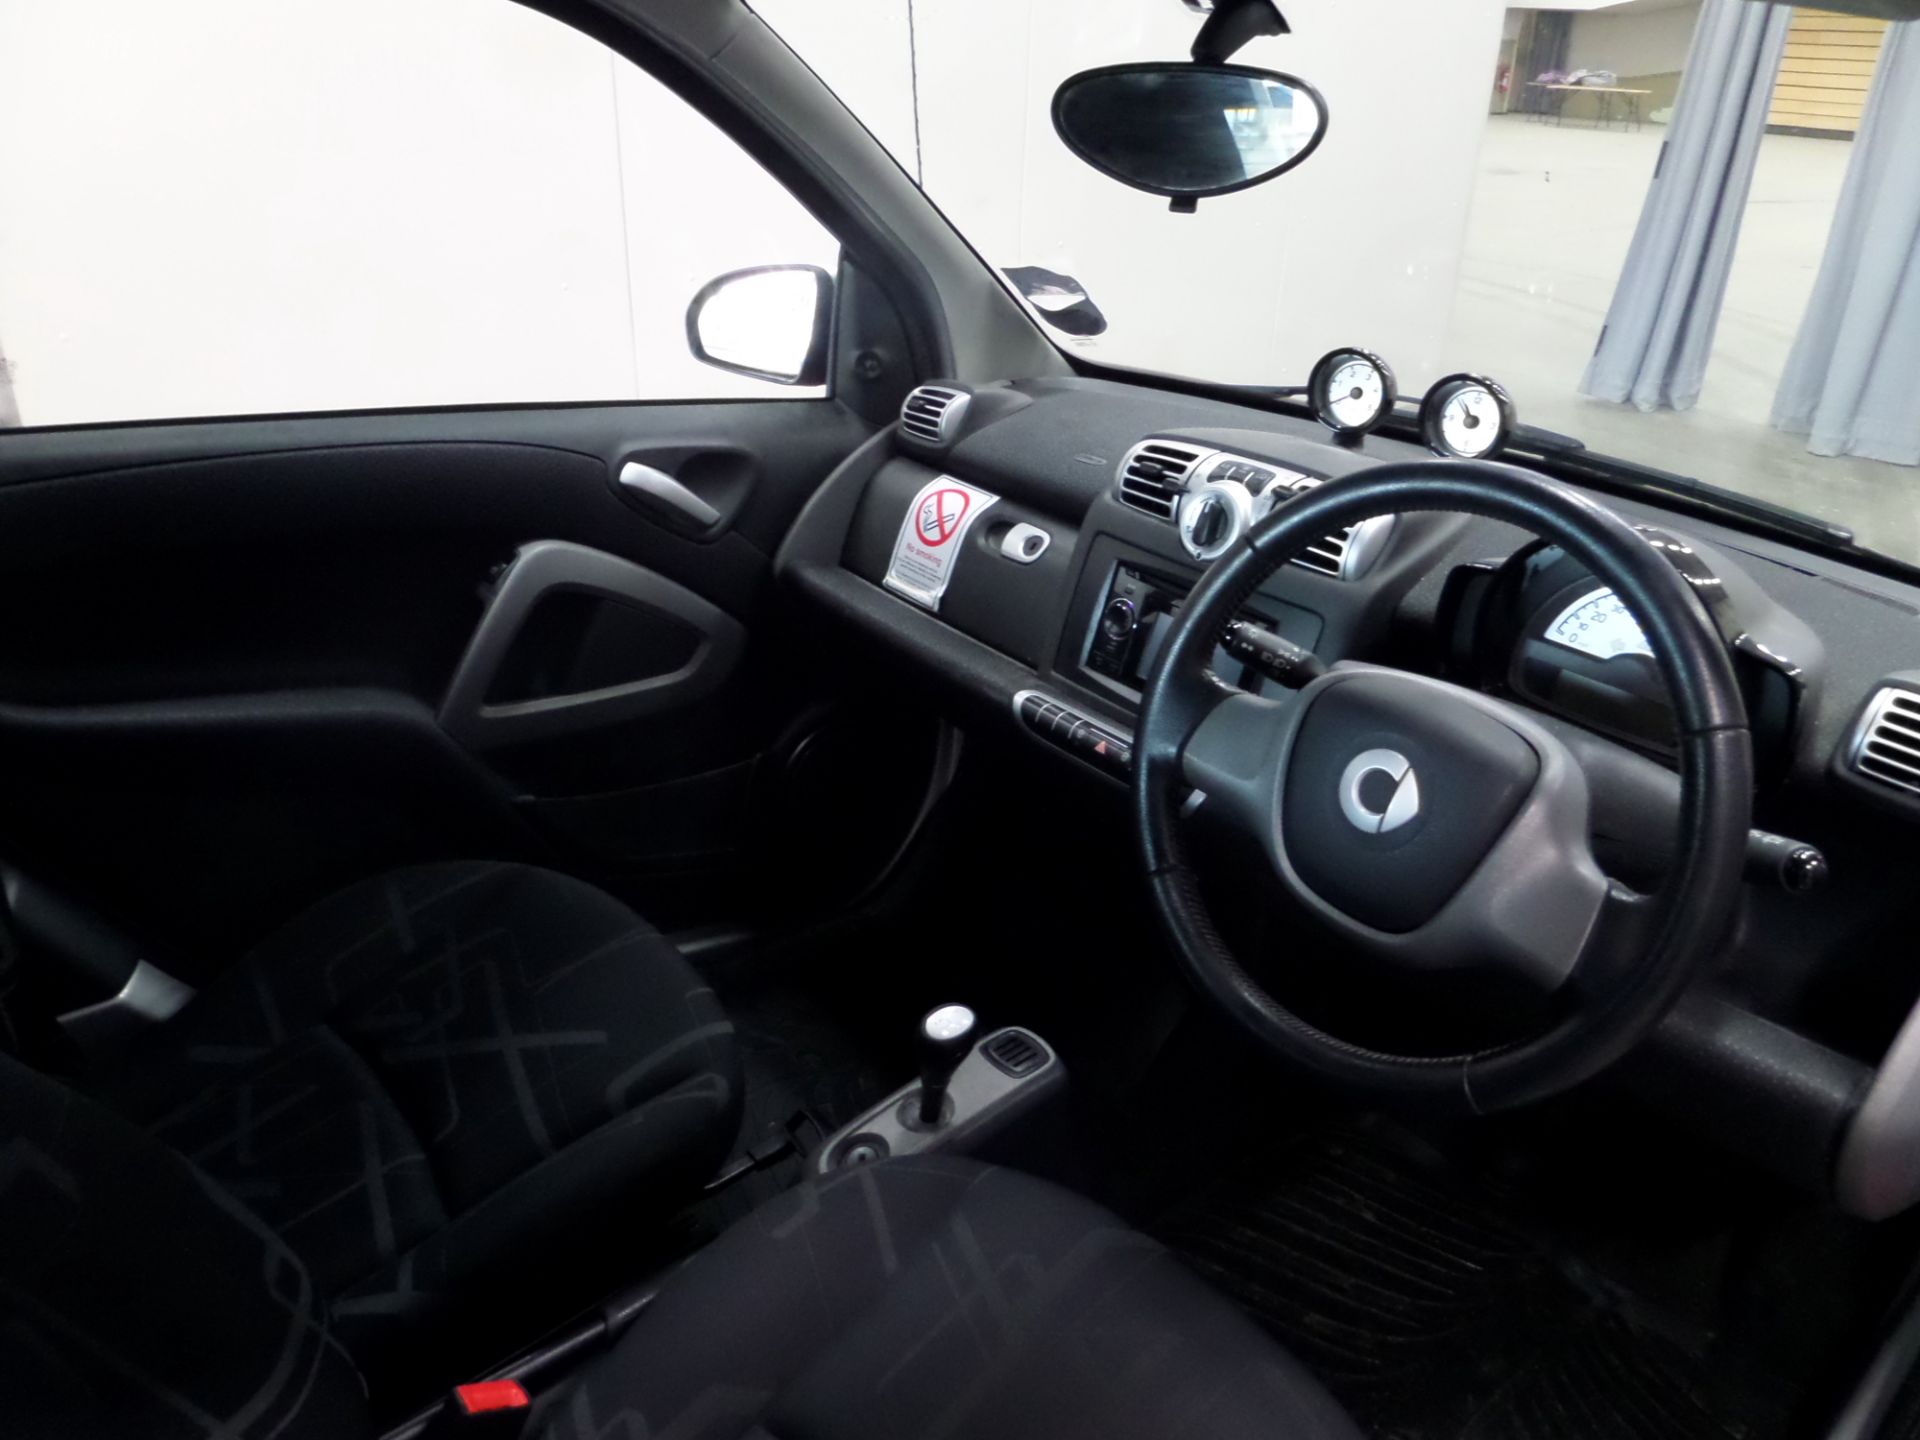 Smart Fortwo Passion Cdi 54 A - 799cc 2 Door Coupe - Image 7 of 8